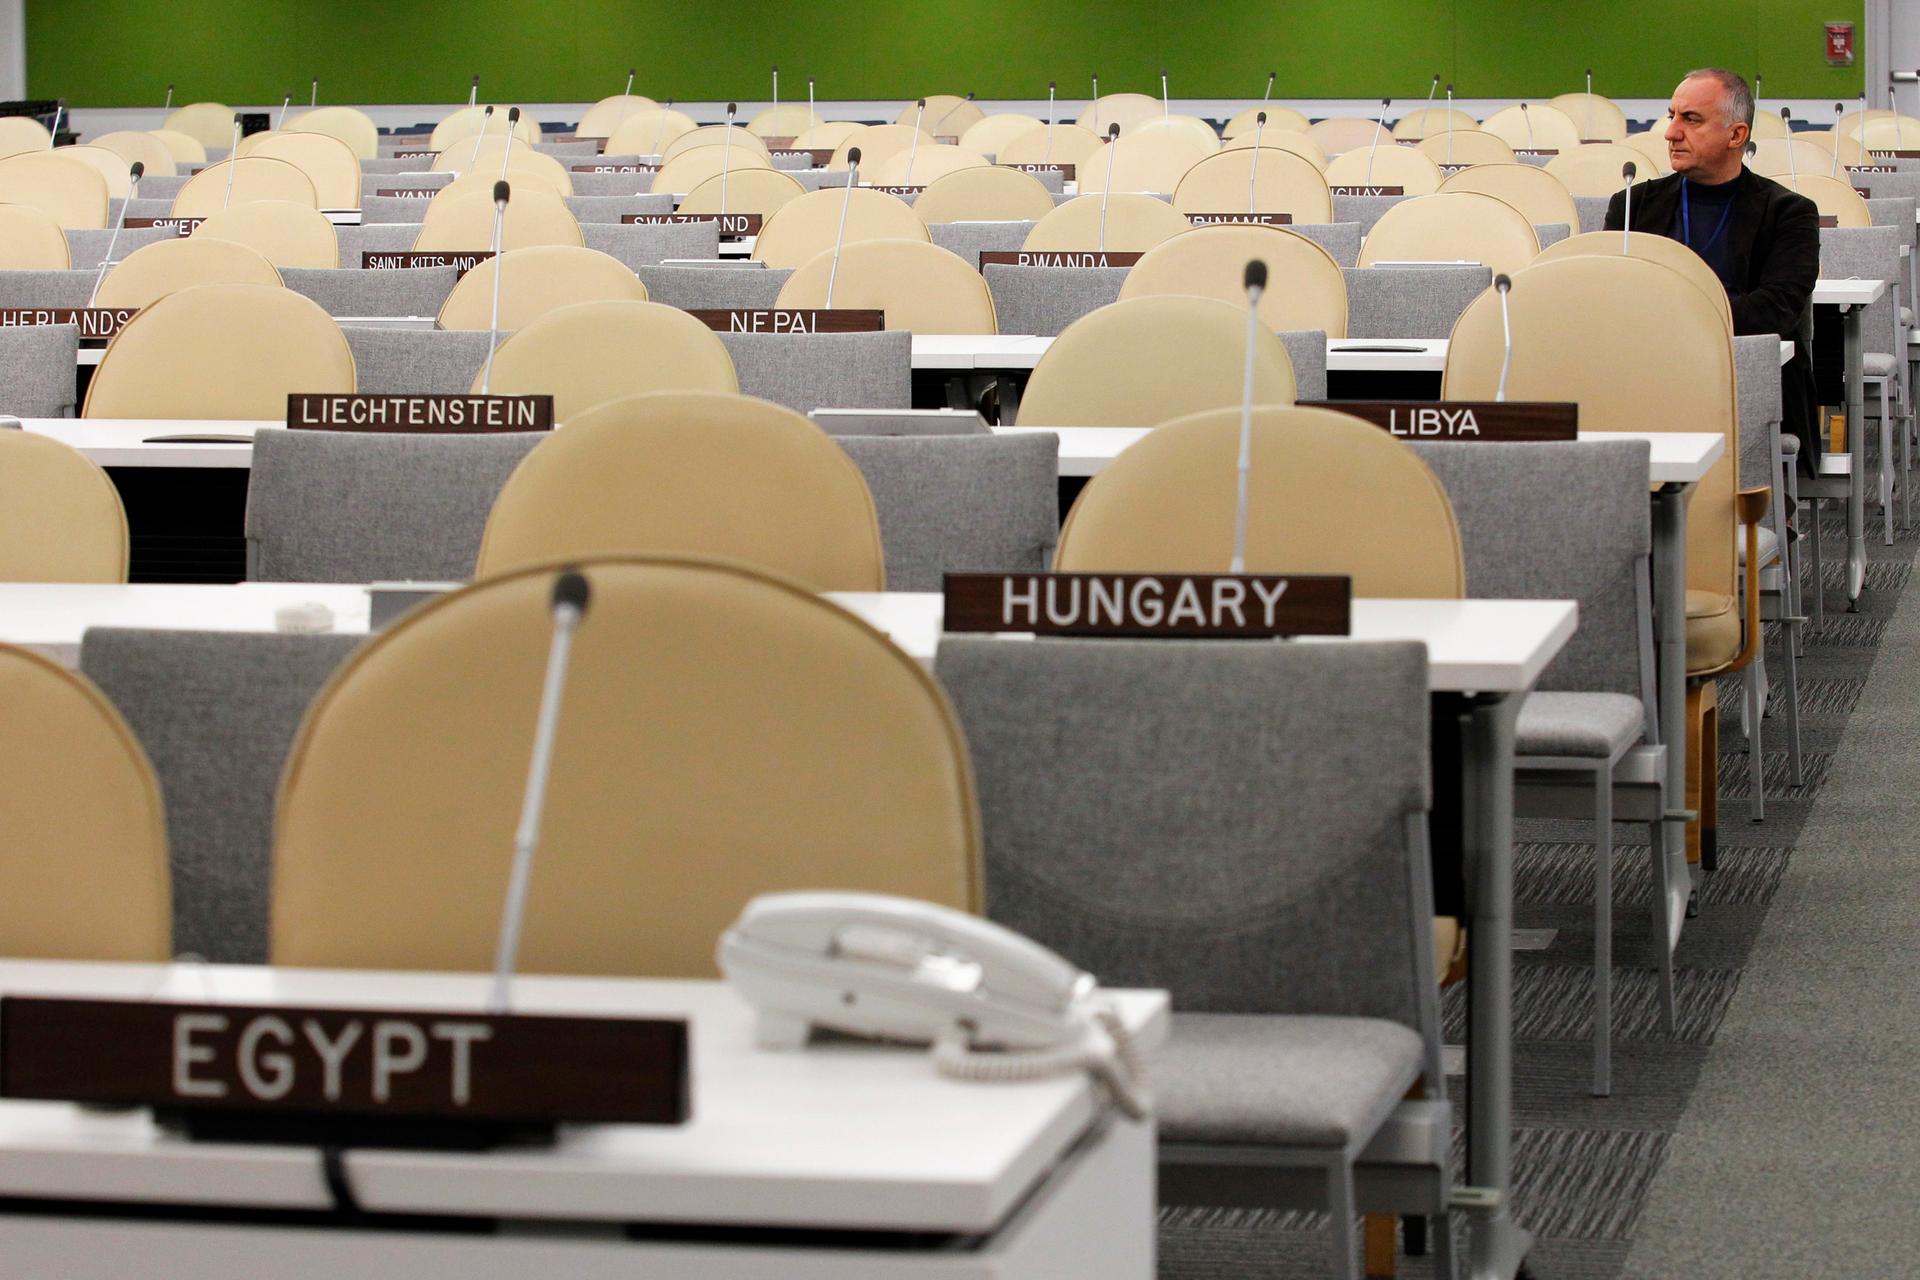 A U.N. worker rests after checking the temporary General Assembly Hall at the U.N. headquarters ahead to the start of the UN general assembly in New York.